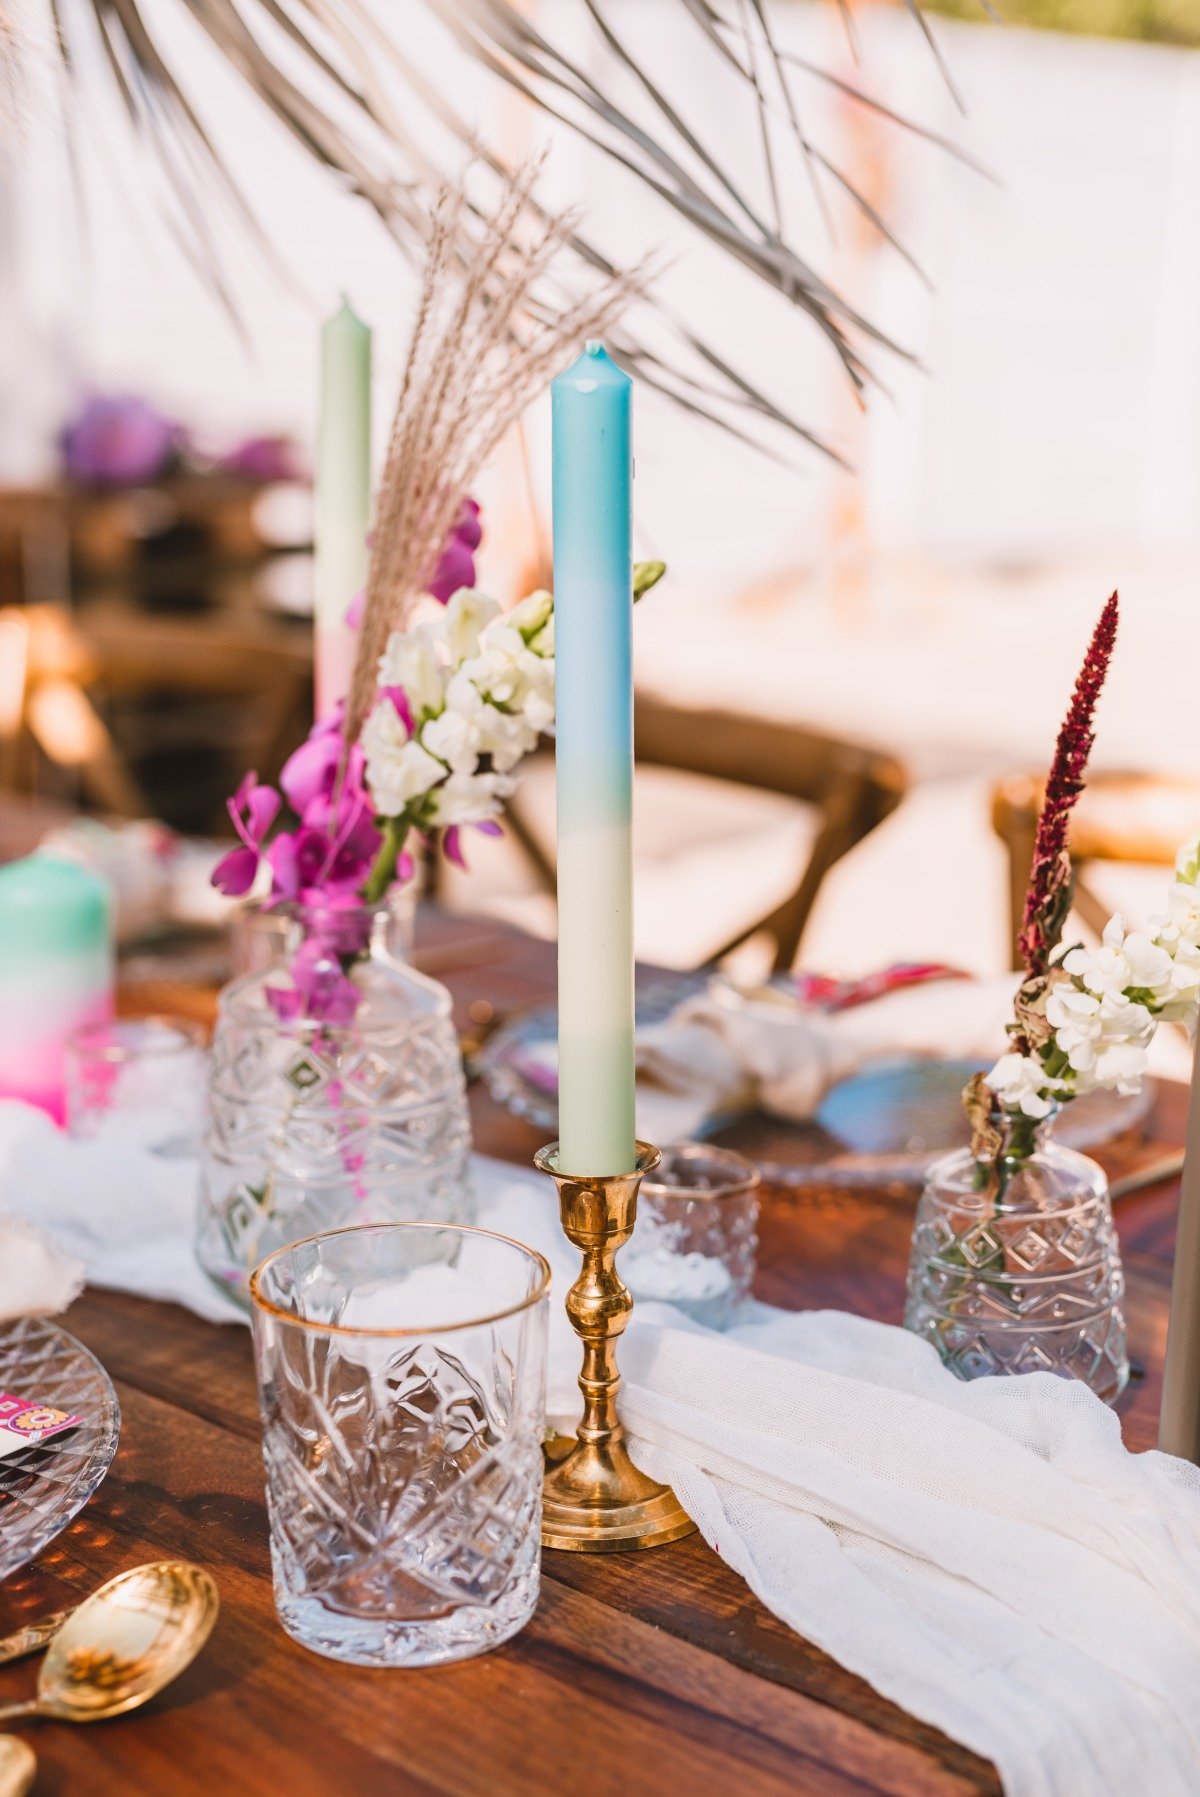 Close up of centerpiece table runner, candle, and glasses